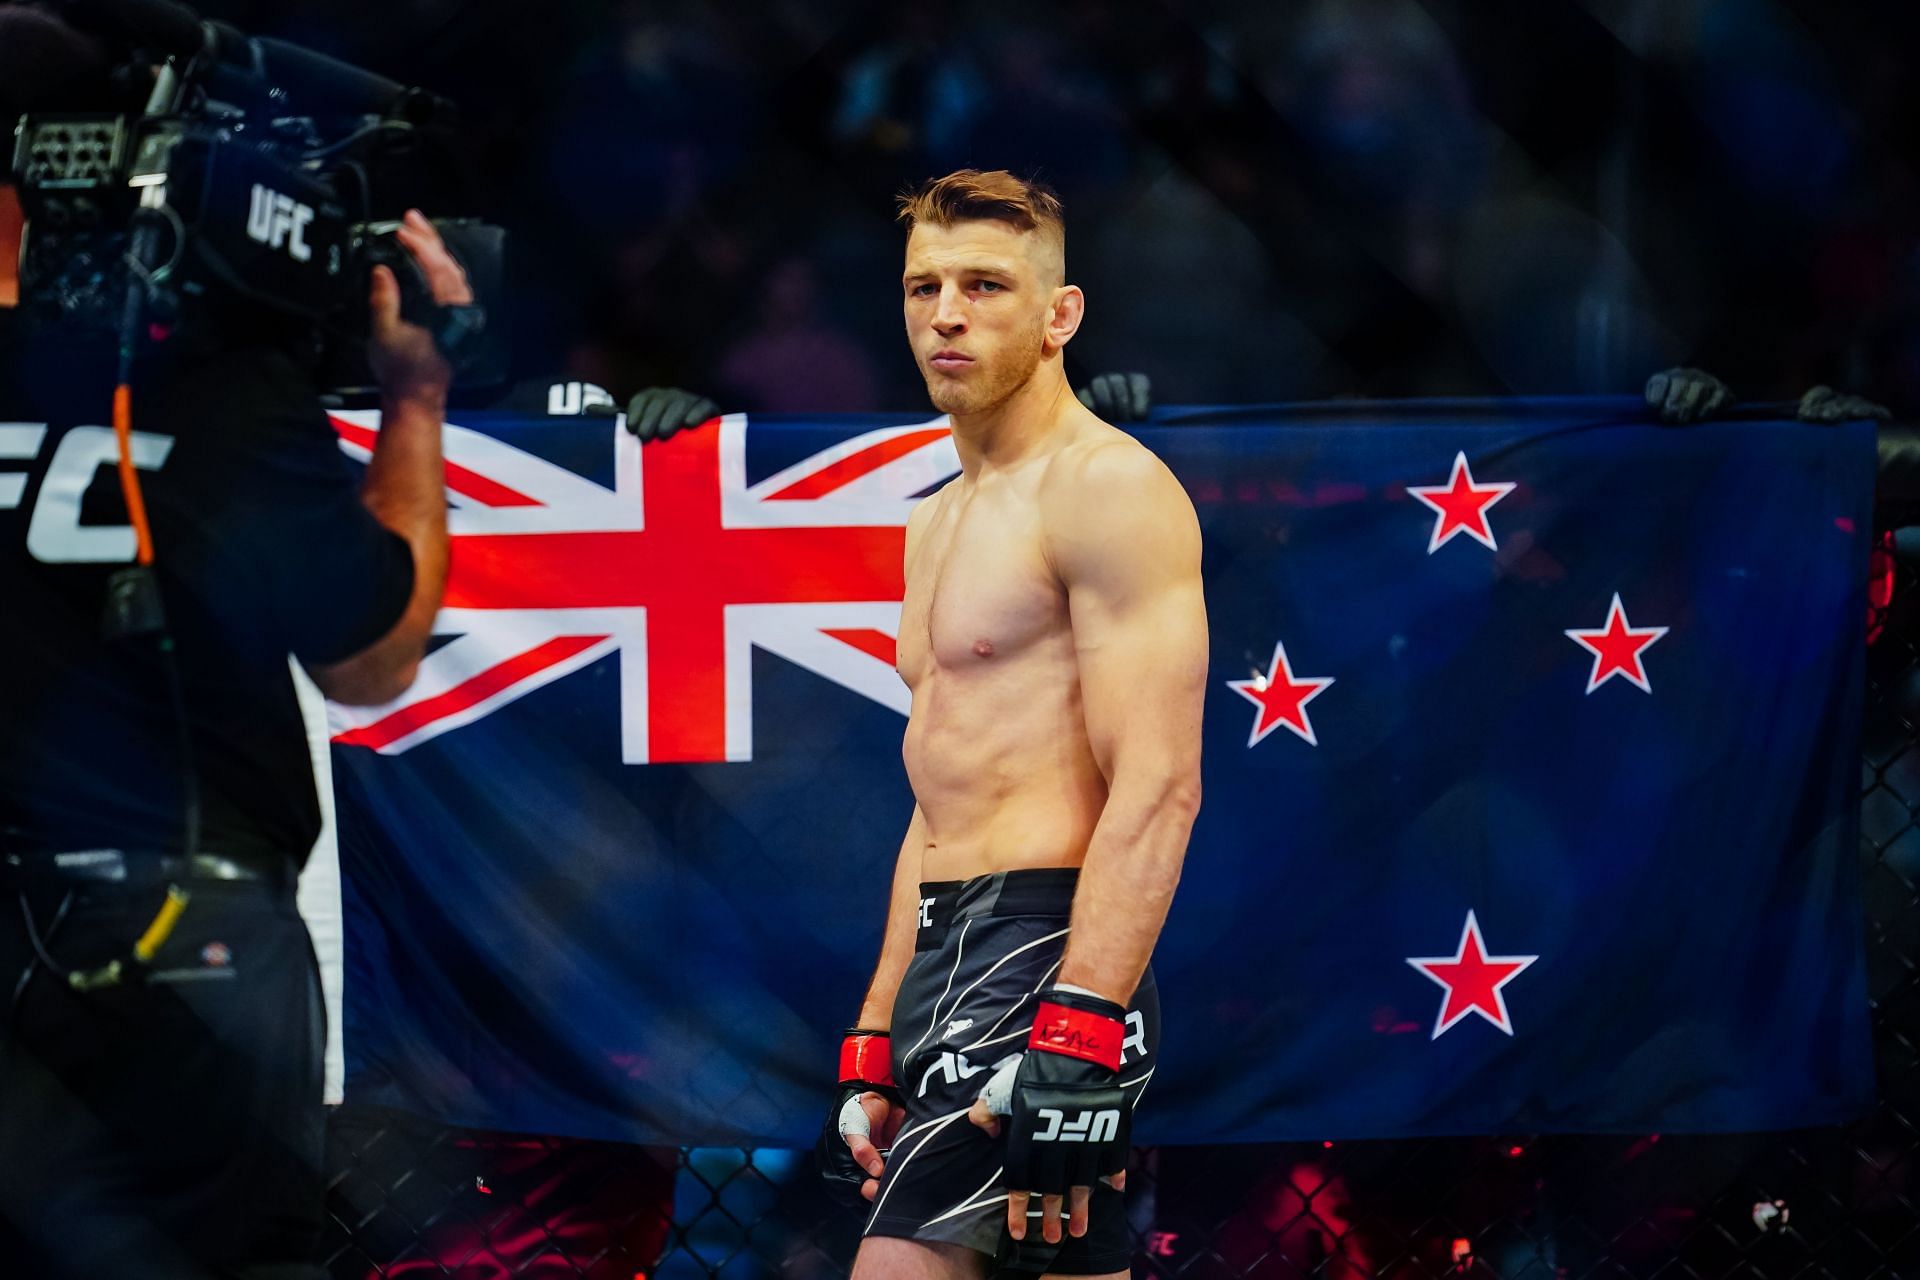 Dan Hooker shared his opinion on the open scoring in MMA